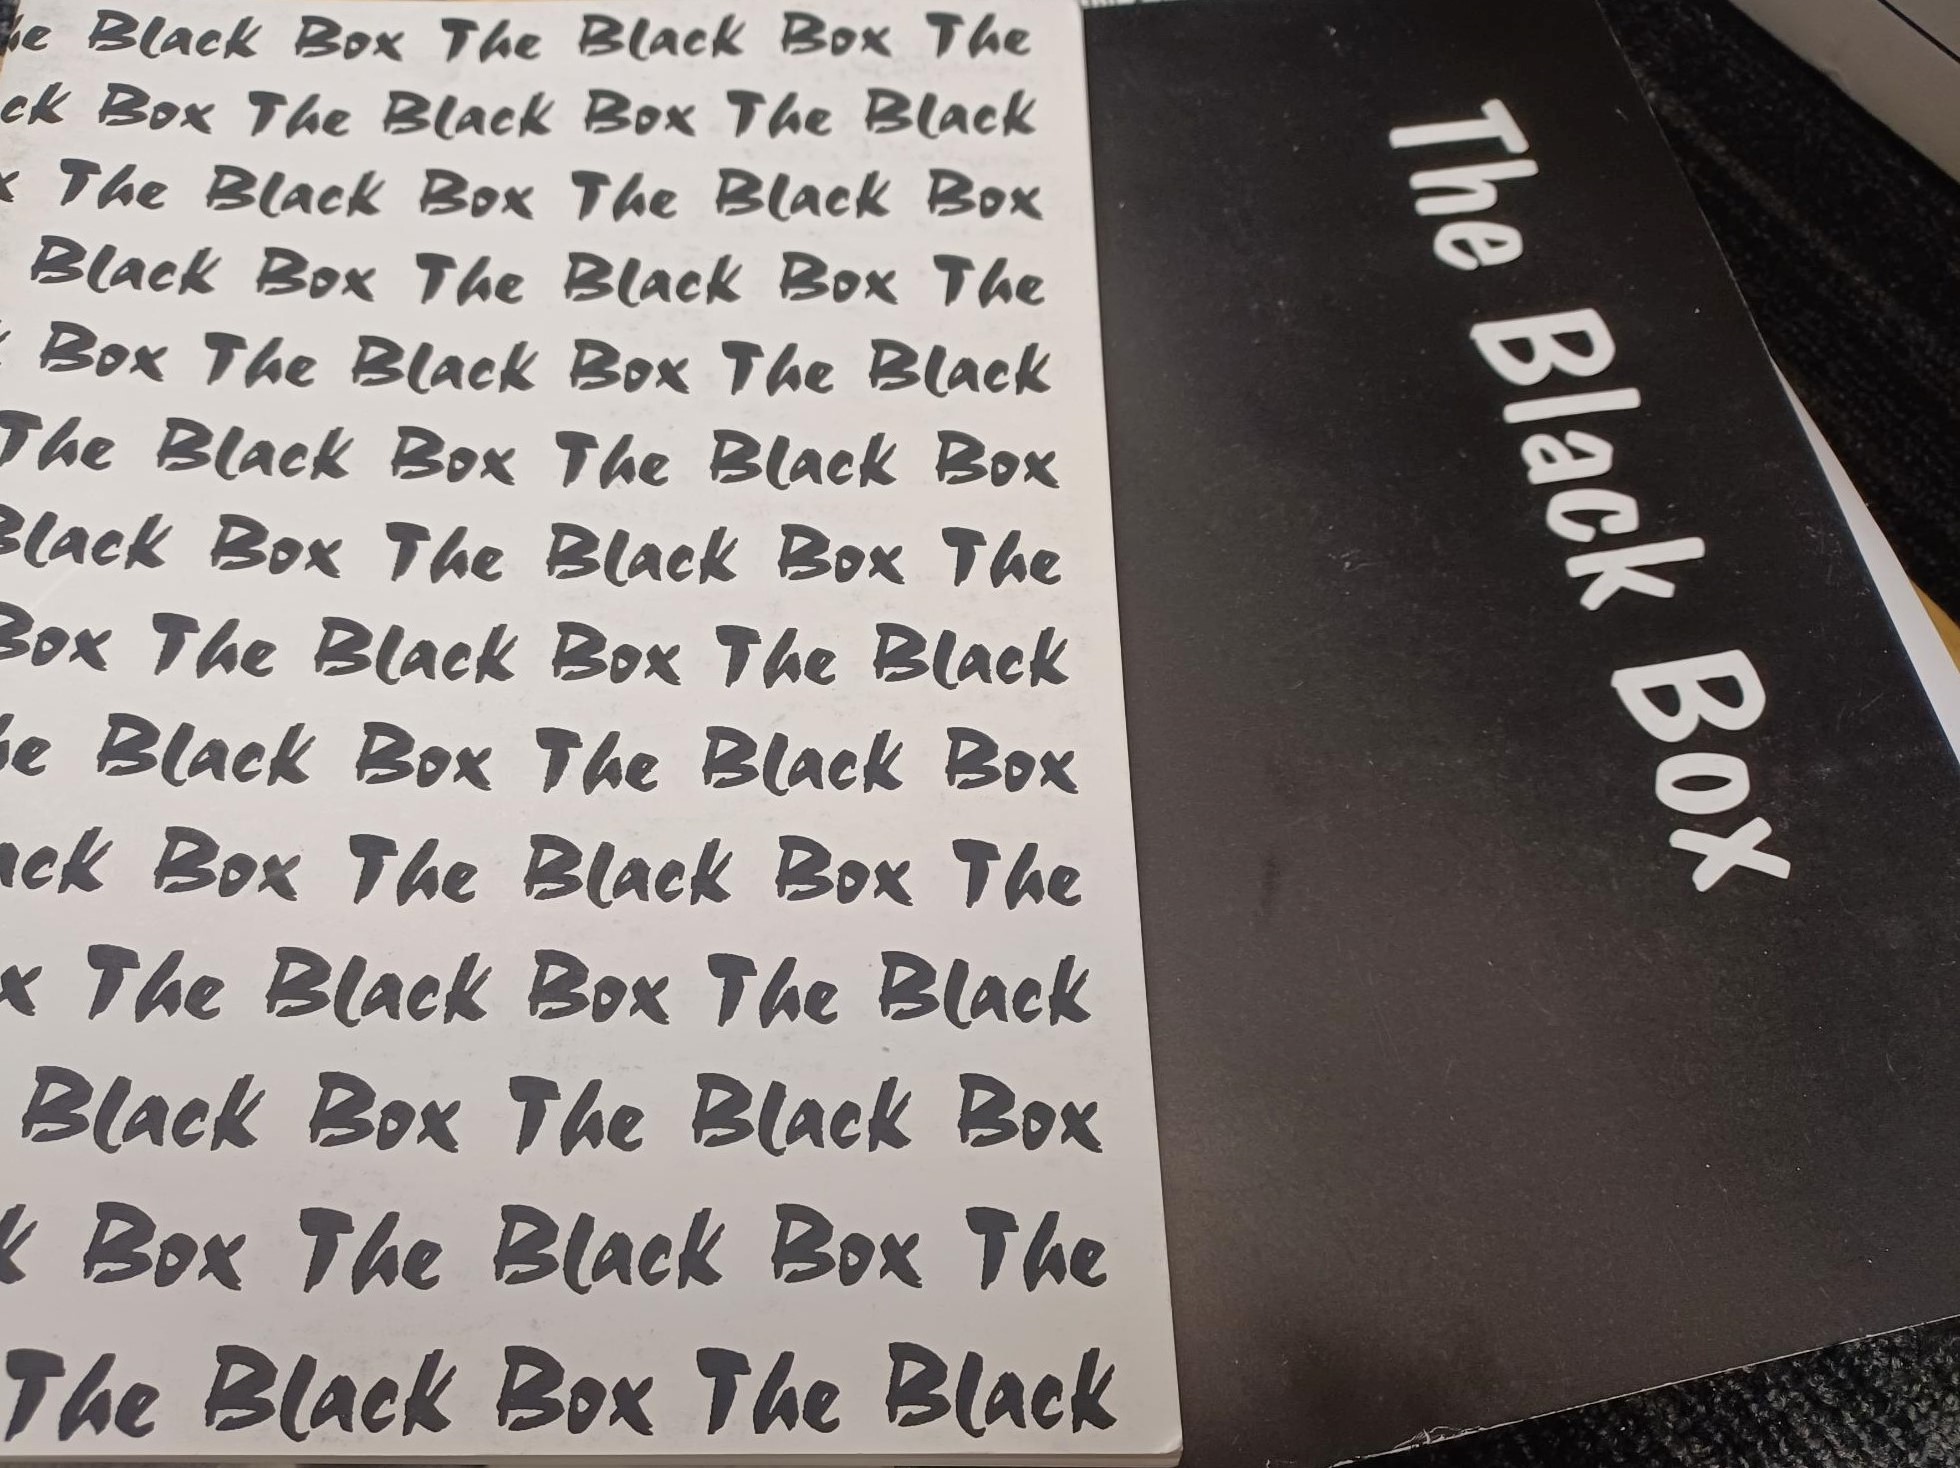 Photograph of a few saddle-stitched copies of The Black Box magazine, both from the 1990s.